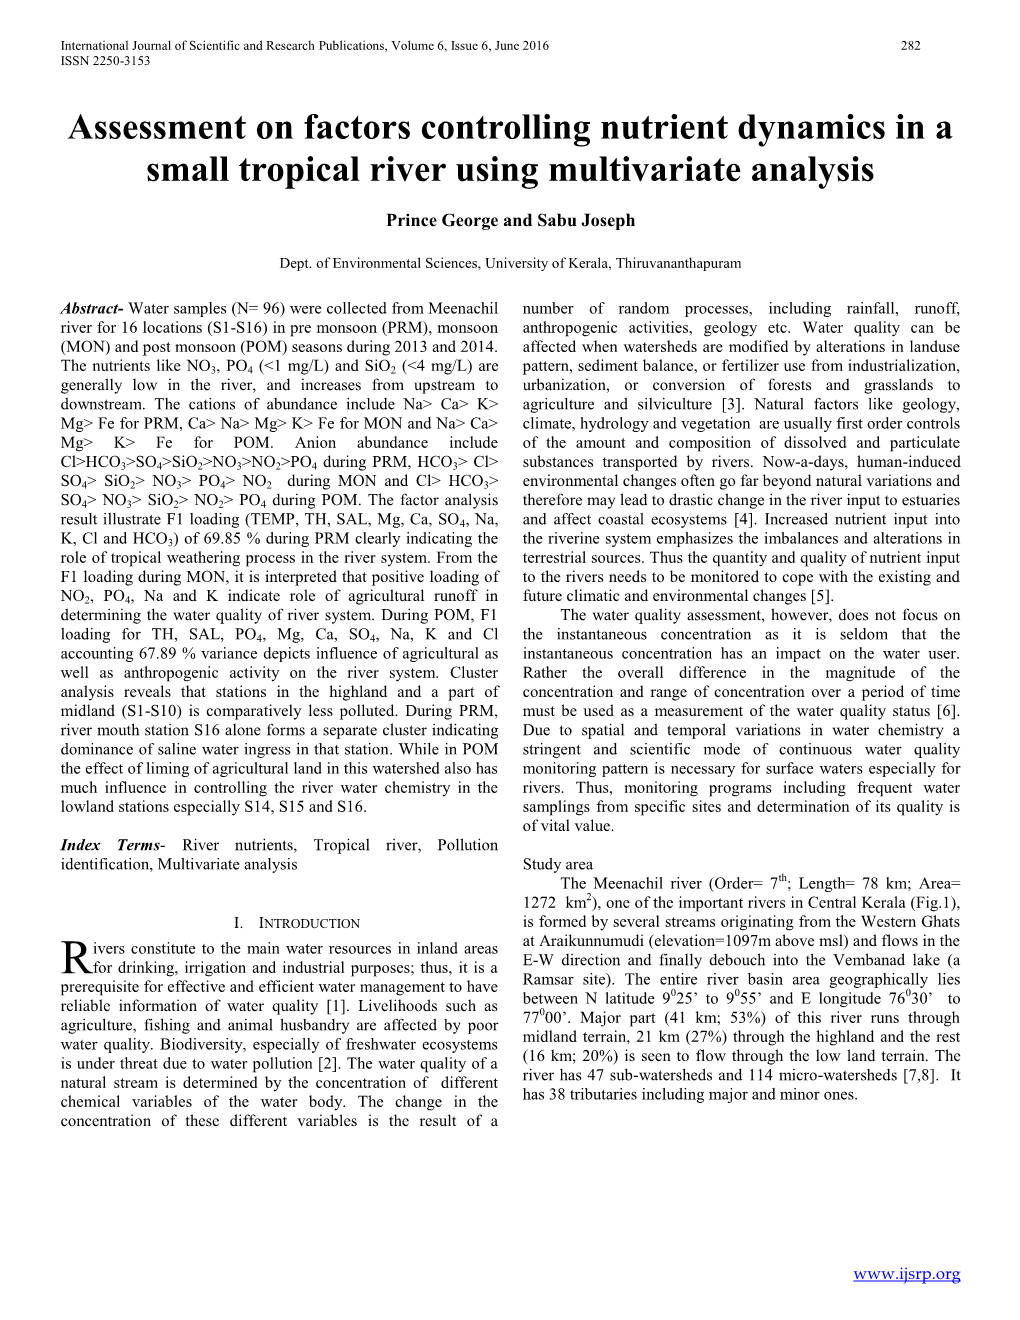 Assessment on Factors Controlling Nutrient Dynamics in a Small Tropical River Using Multivariate Analysis